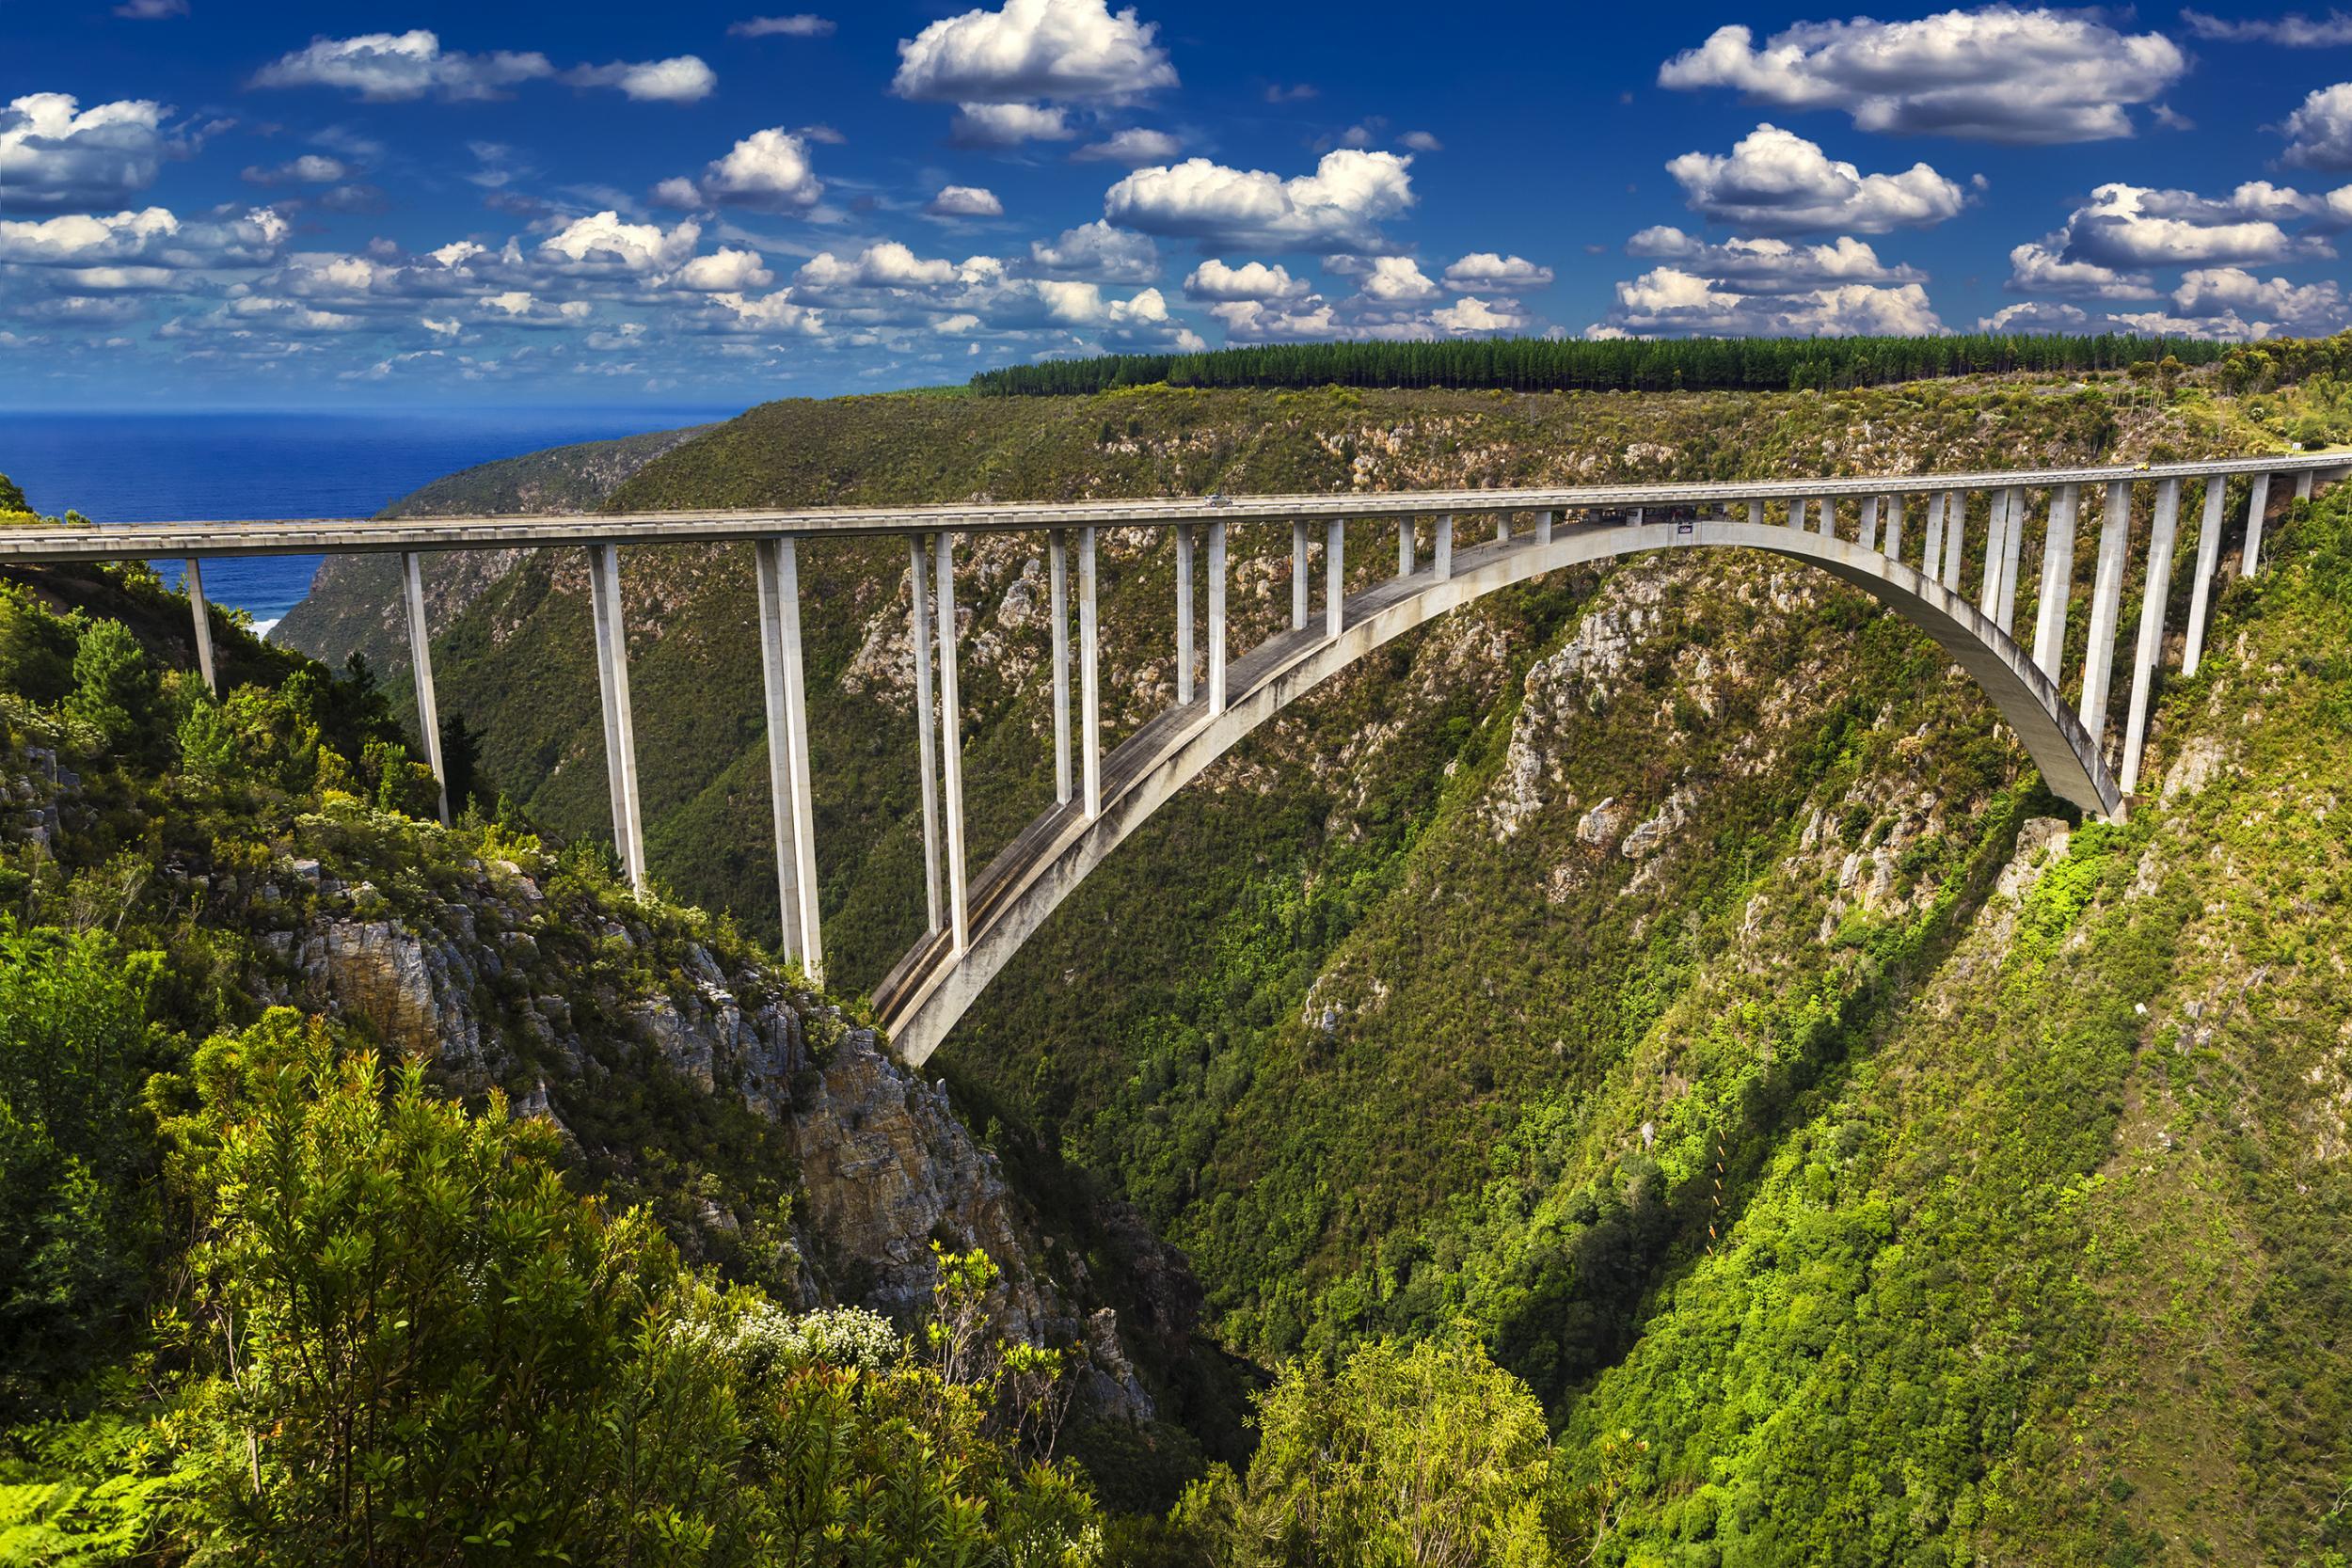 The Bloukrans Bridge is a well-known stop on the Garden Route; daredevils flock here to perform the world's highest bridge bungee jump